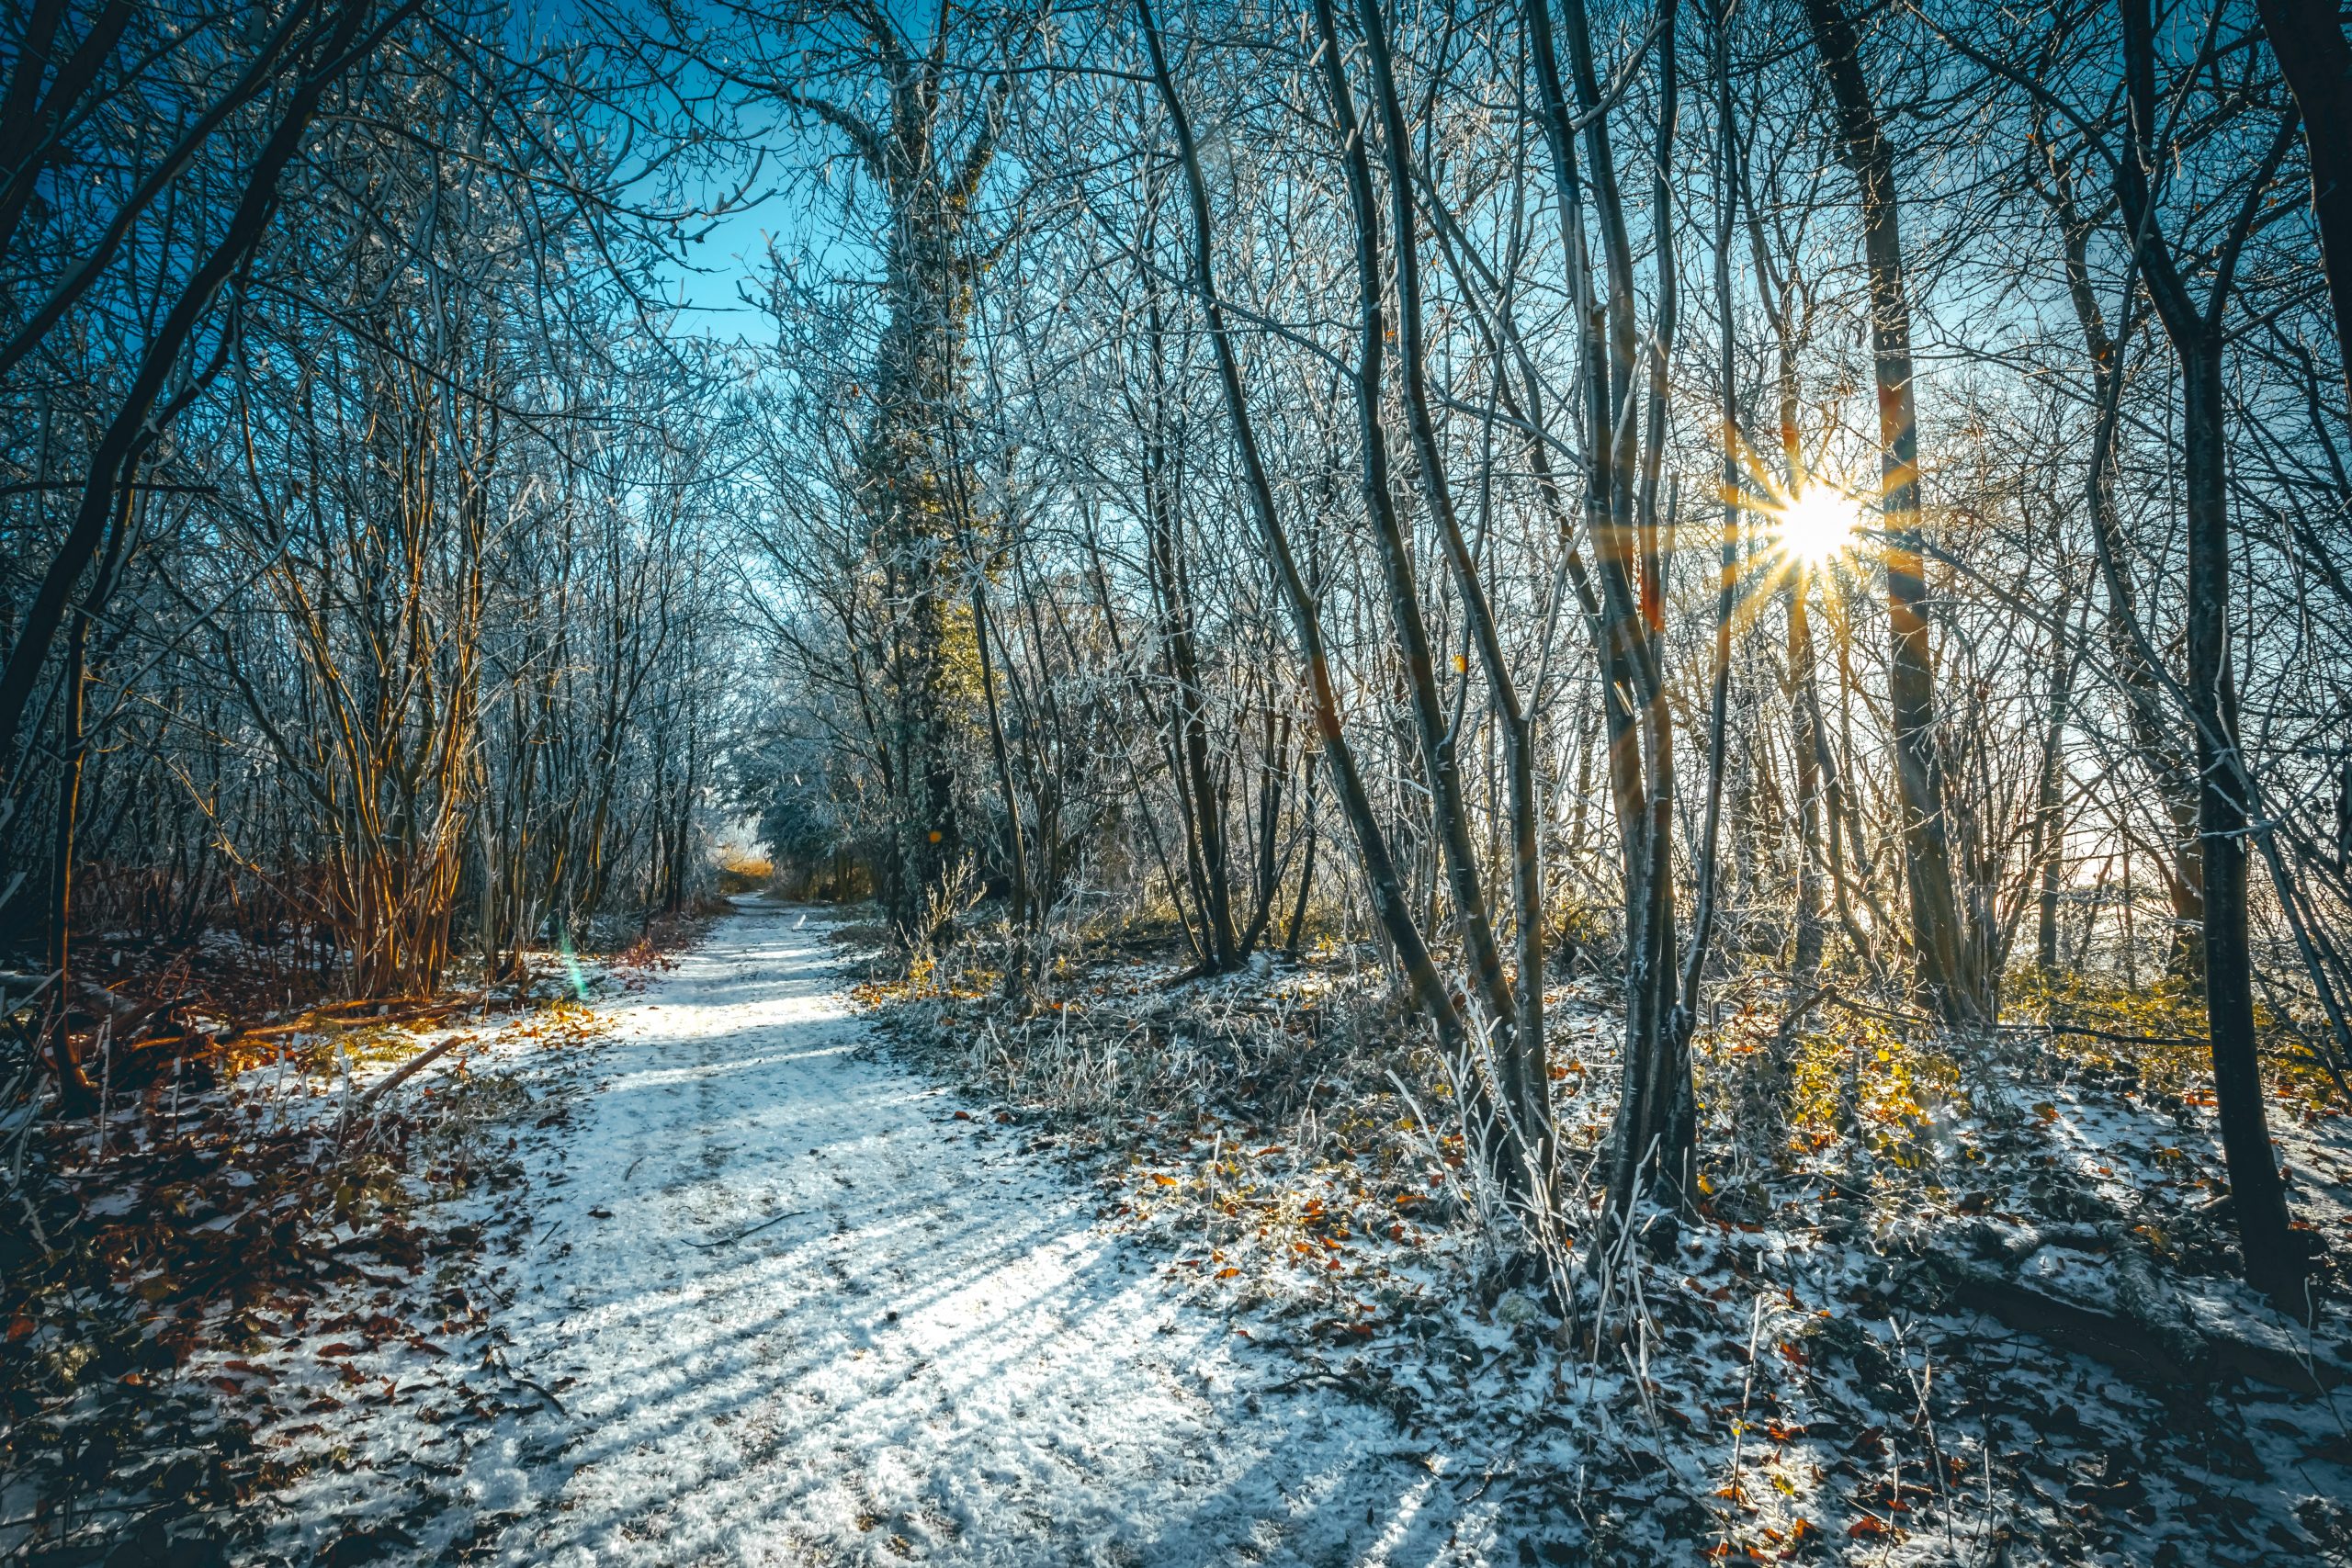 Do you need Winter Photography for your development?